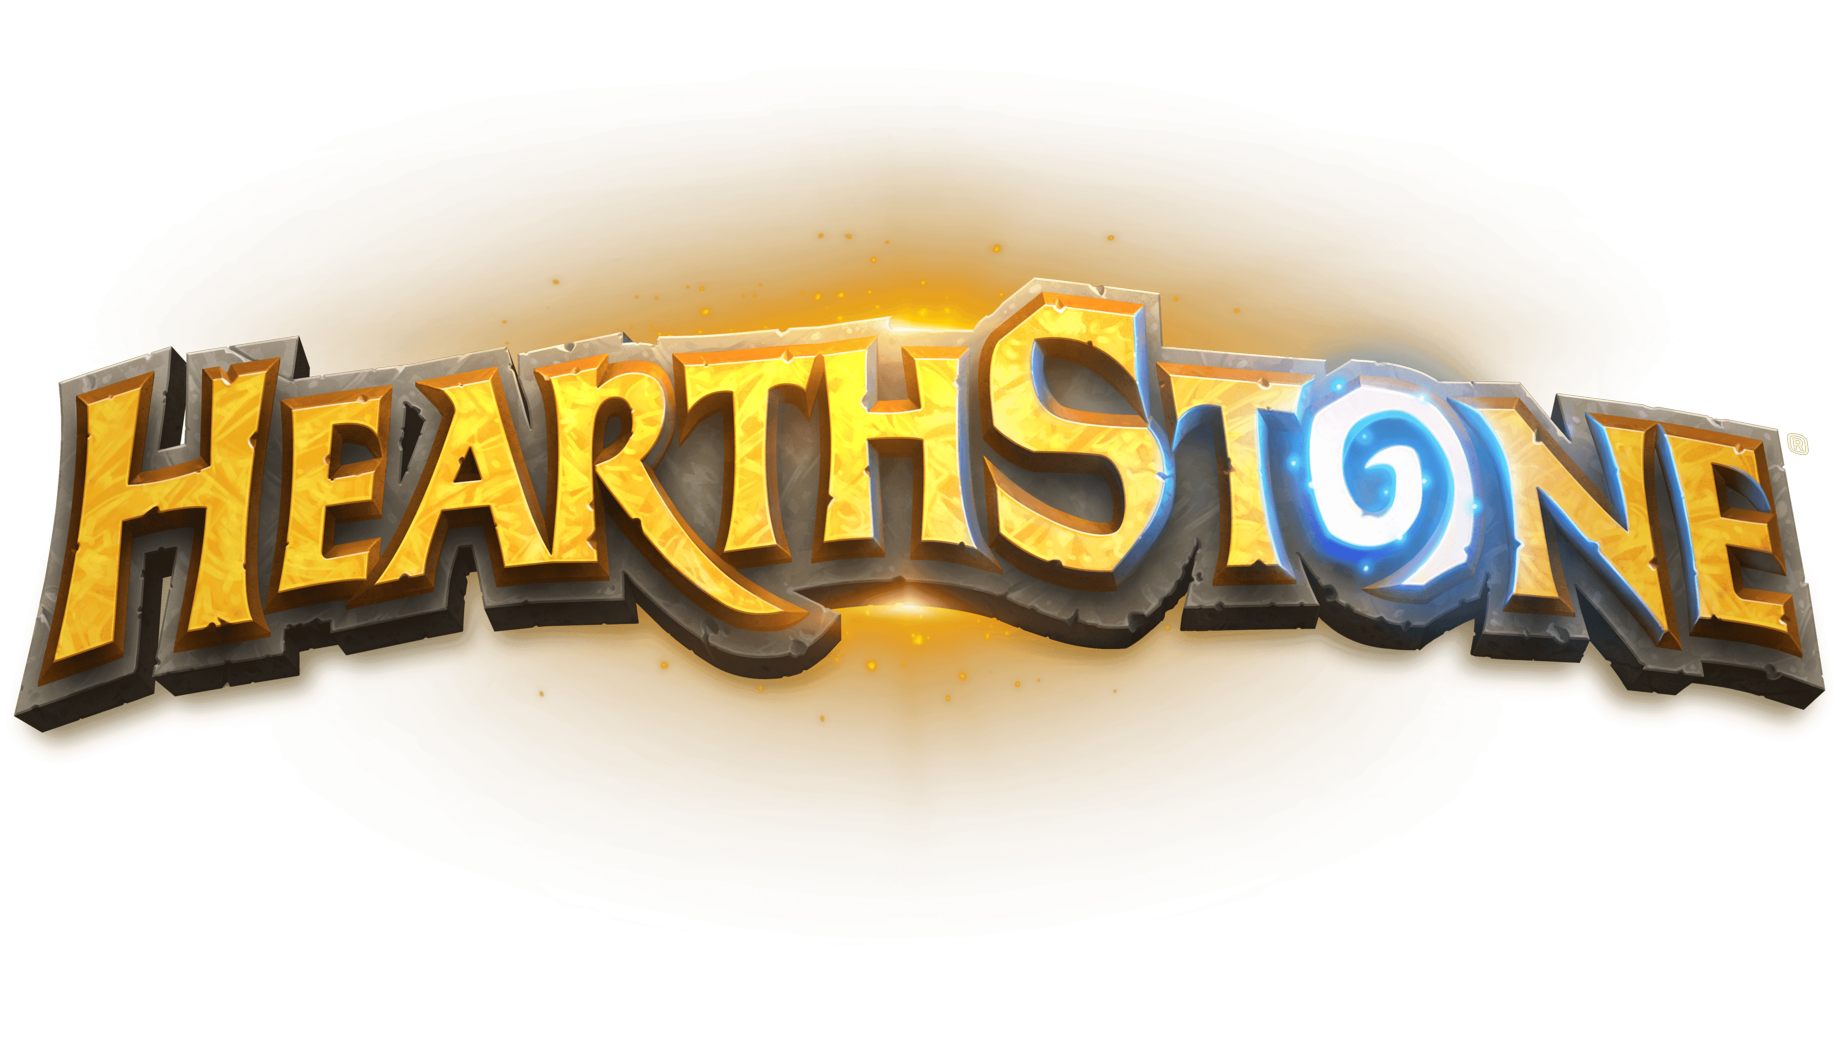 Hearthstone heroes of warcraft sign 2016 present